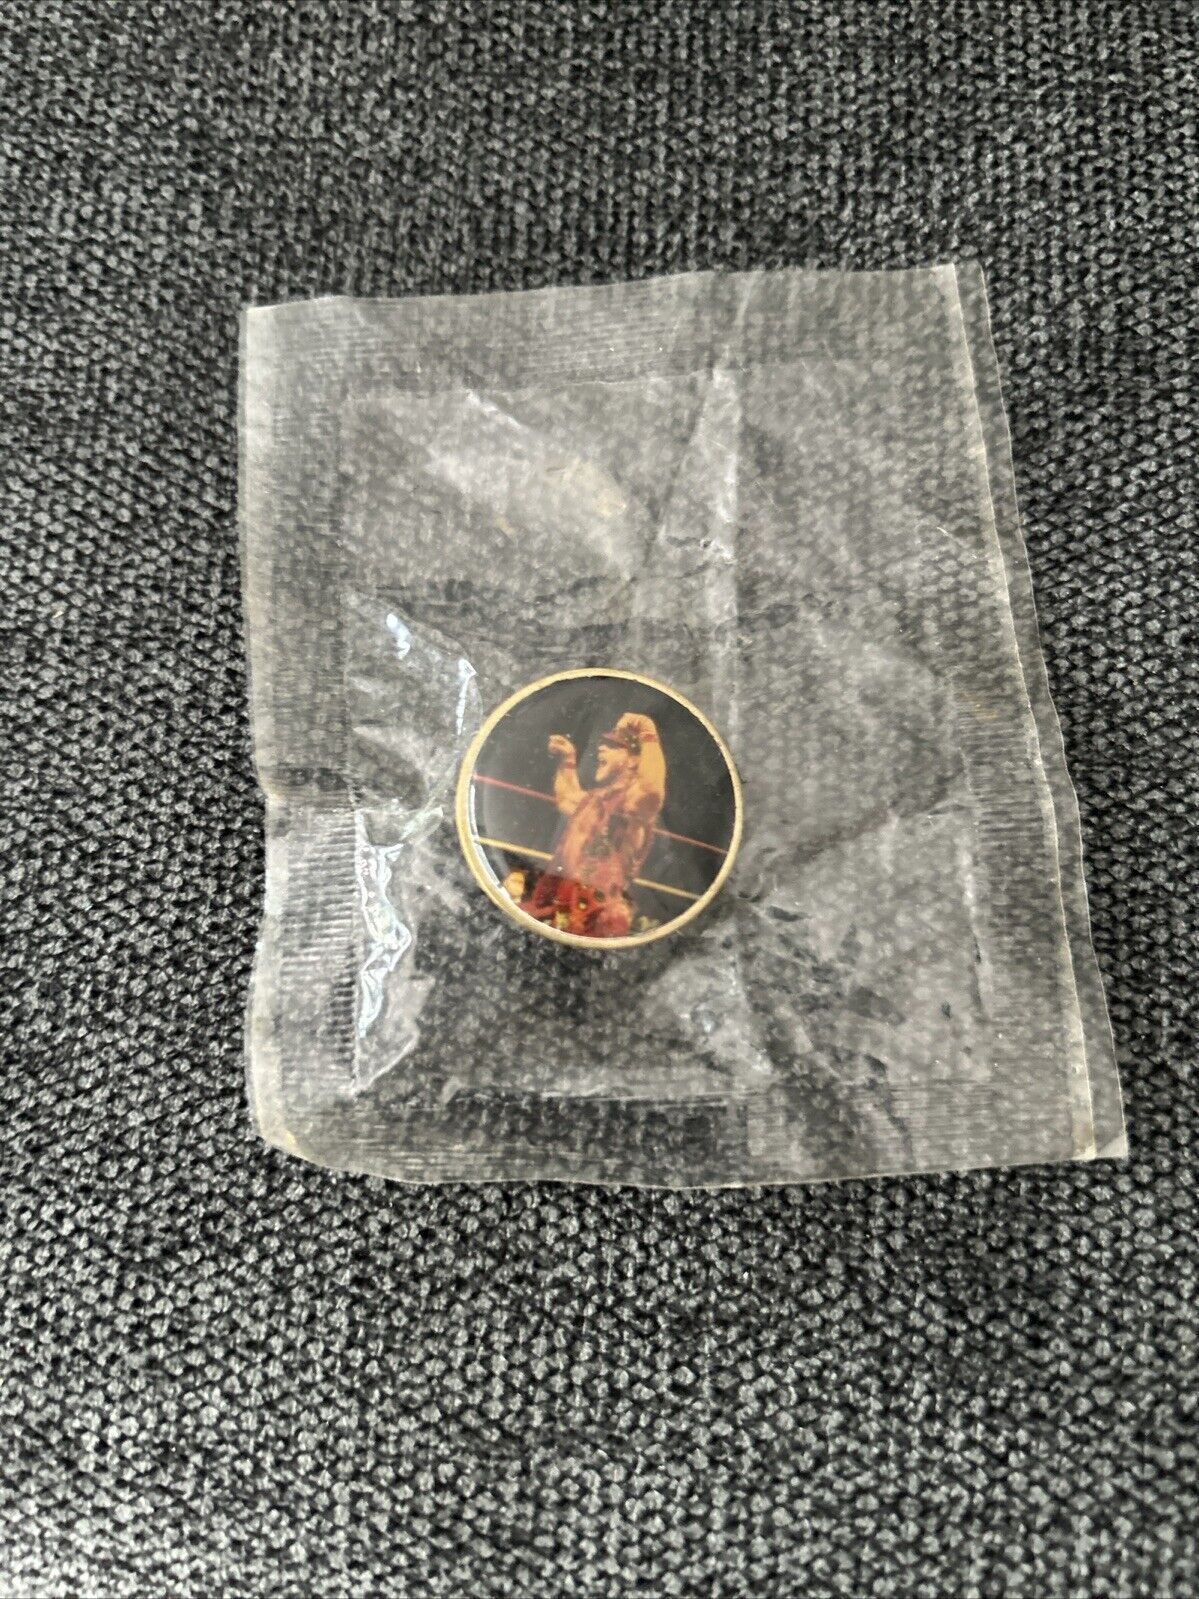 Vintage Shawn Michaels  Button Pin Brand New Never Open Wwe WWF